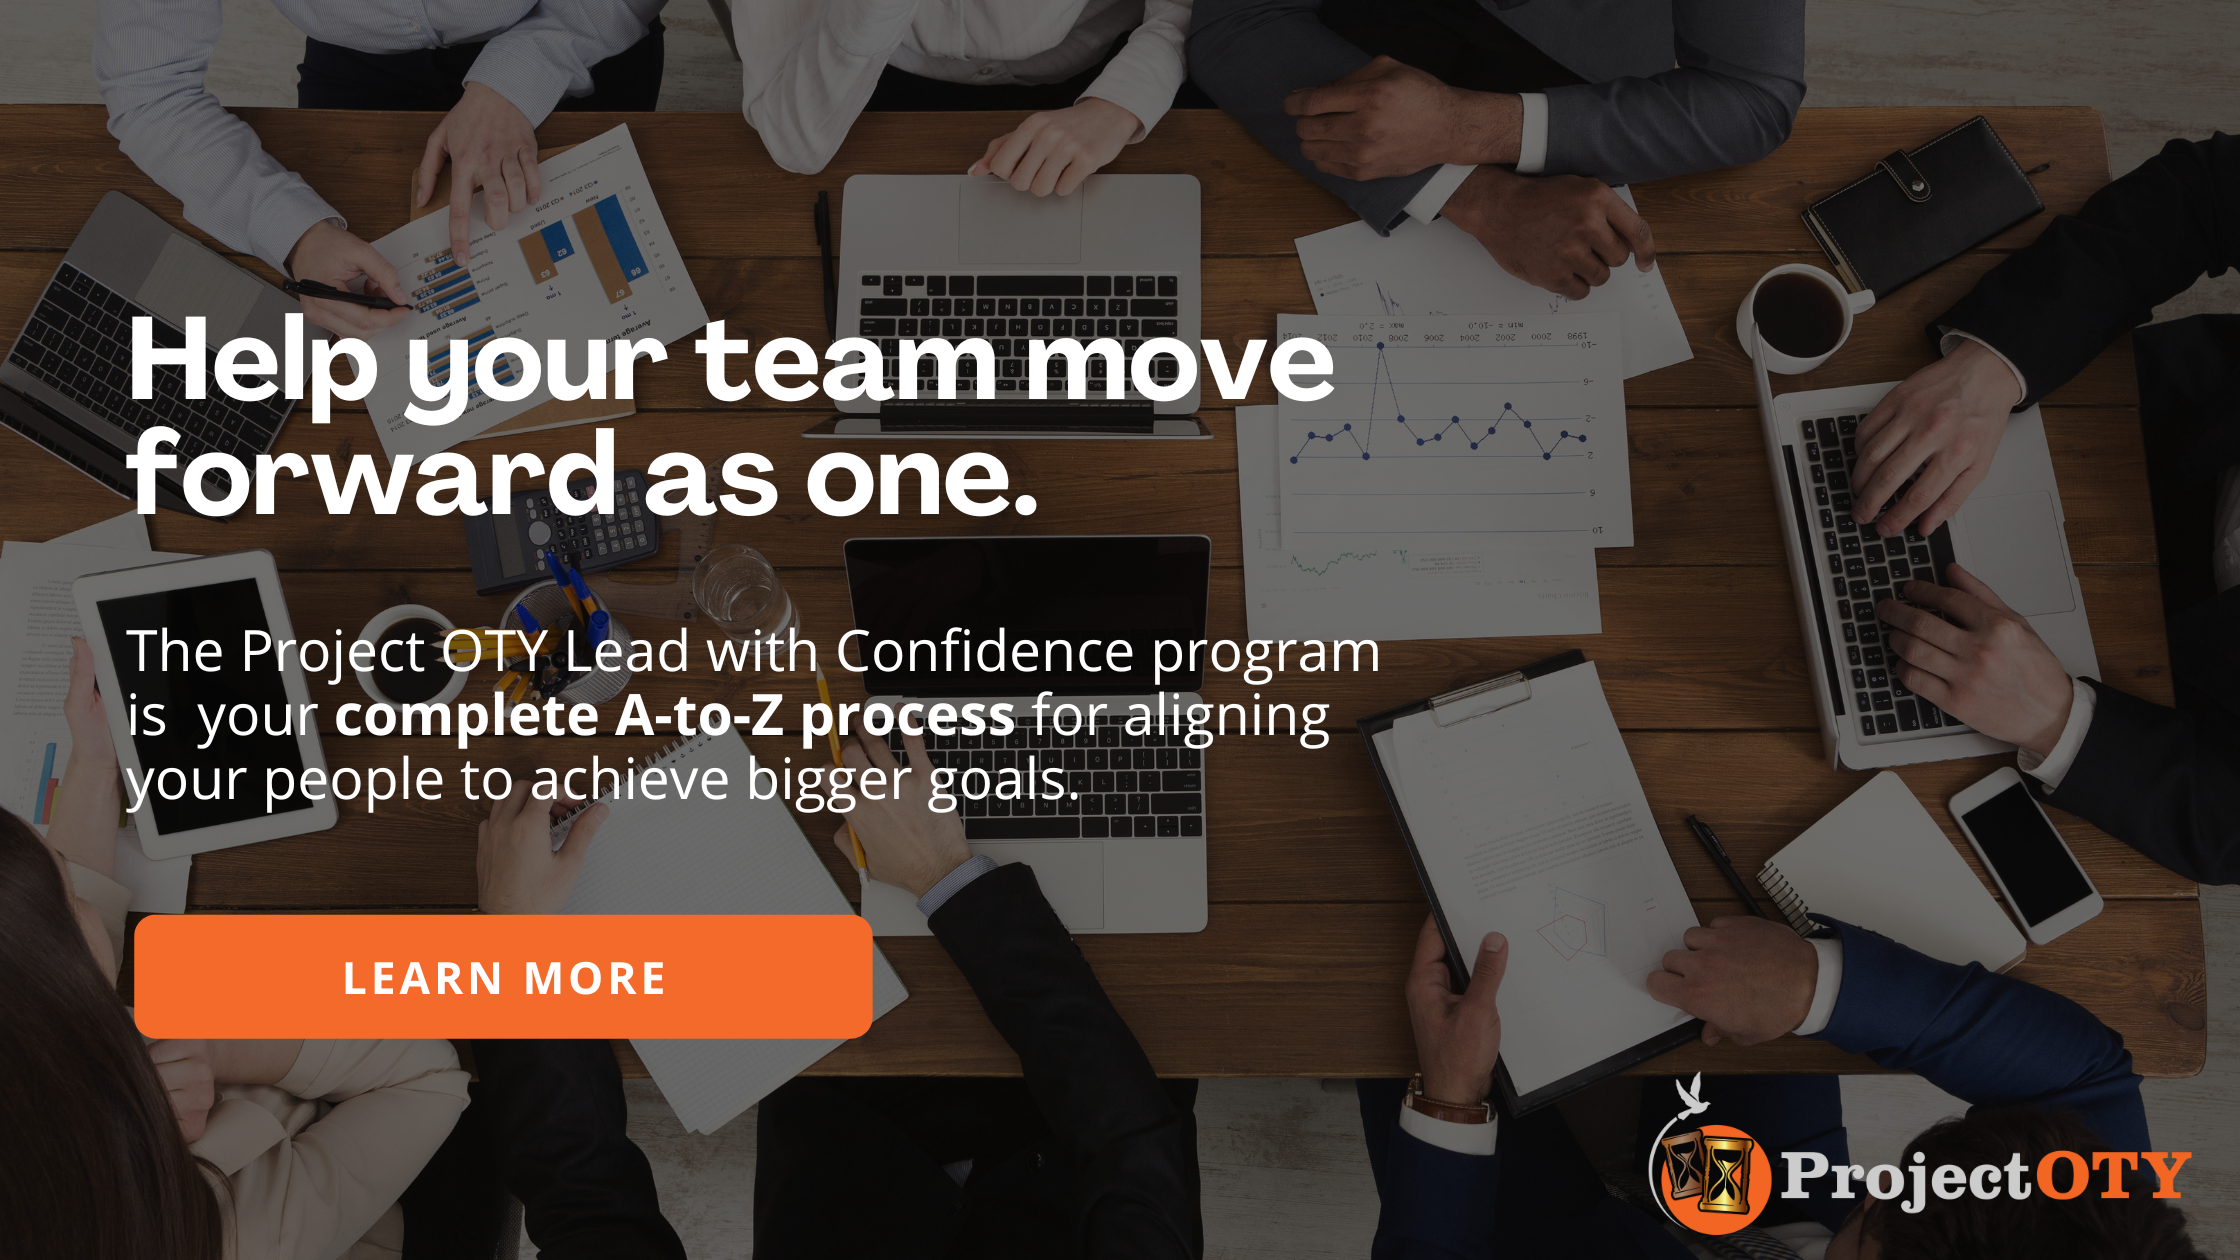 Graphic of team at a table with text reading "help you team move forward as one".